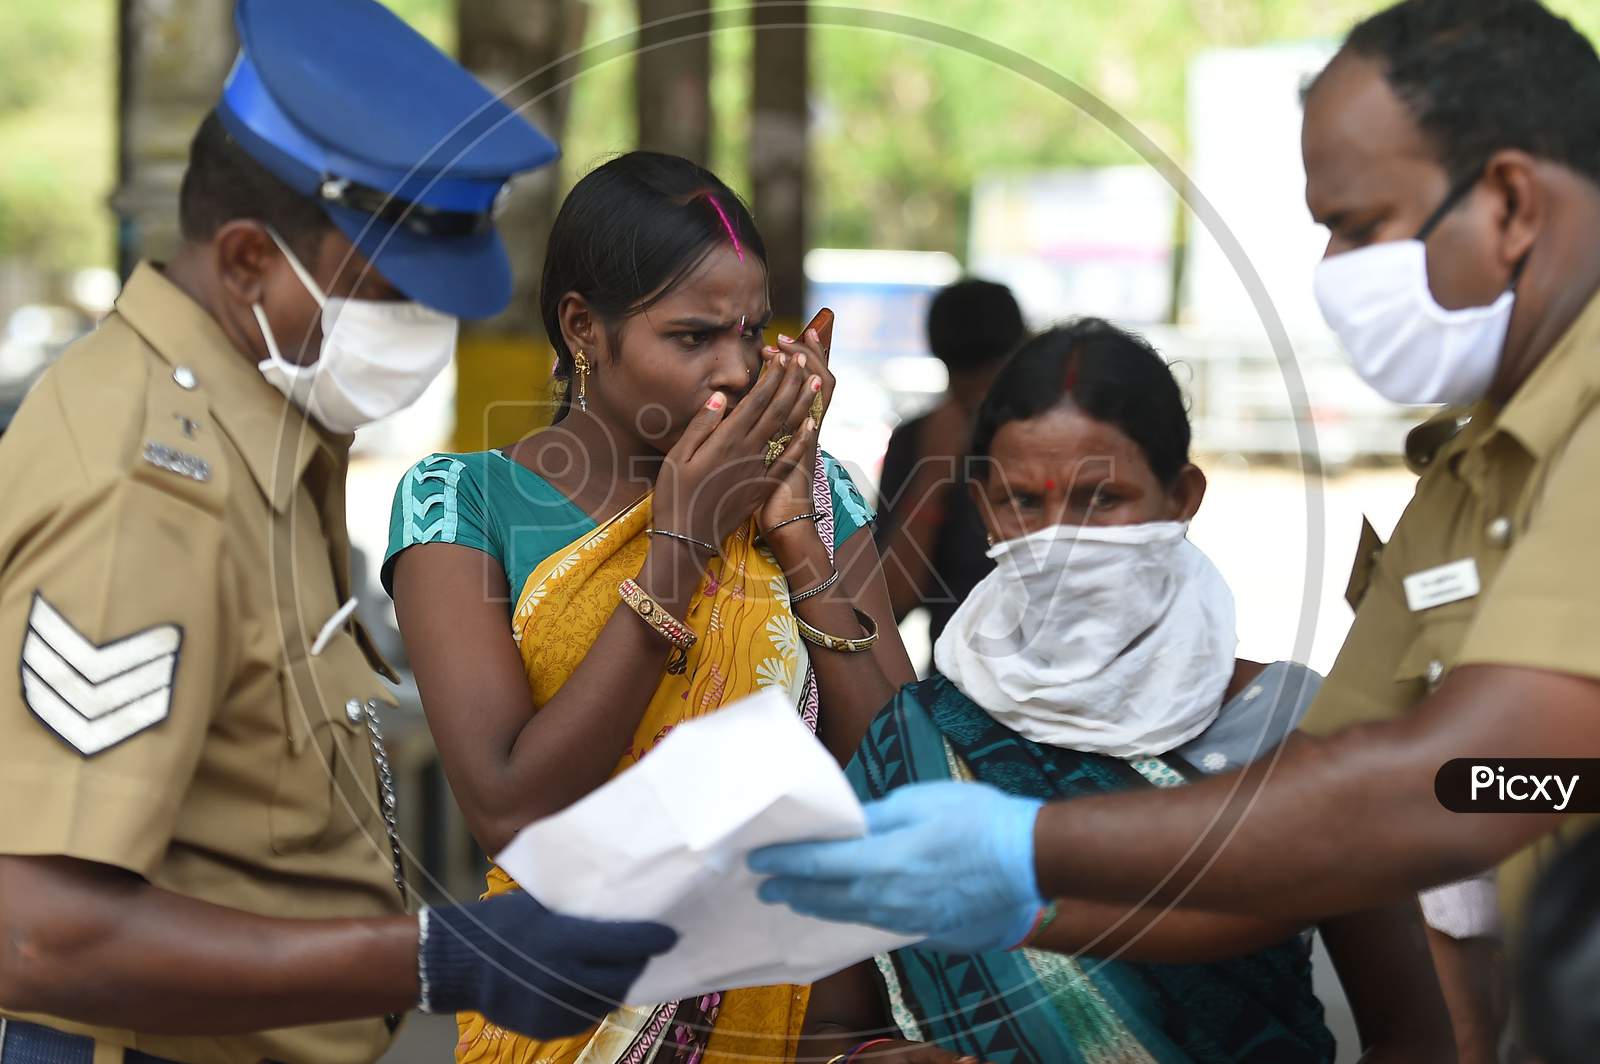 Migrant Labourers From Bihar Get Thermal Screening And Document Verification Before They Leave To Them Native Places During The Ongoing Nationwide Lockdown In The Wake Of Coronavirus Pandemic, In Chennai